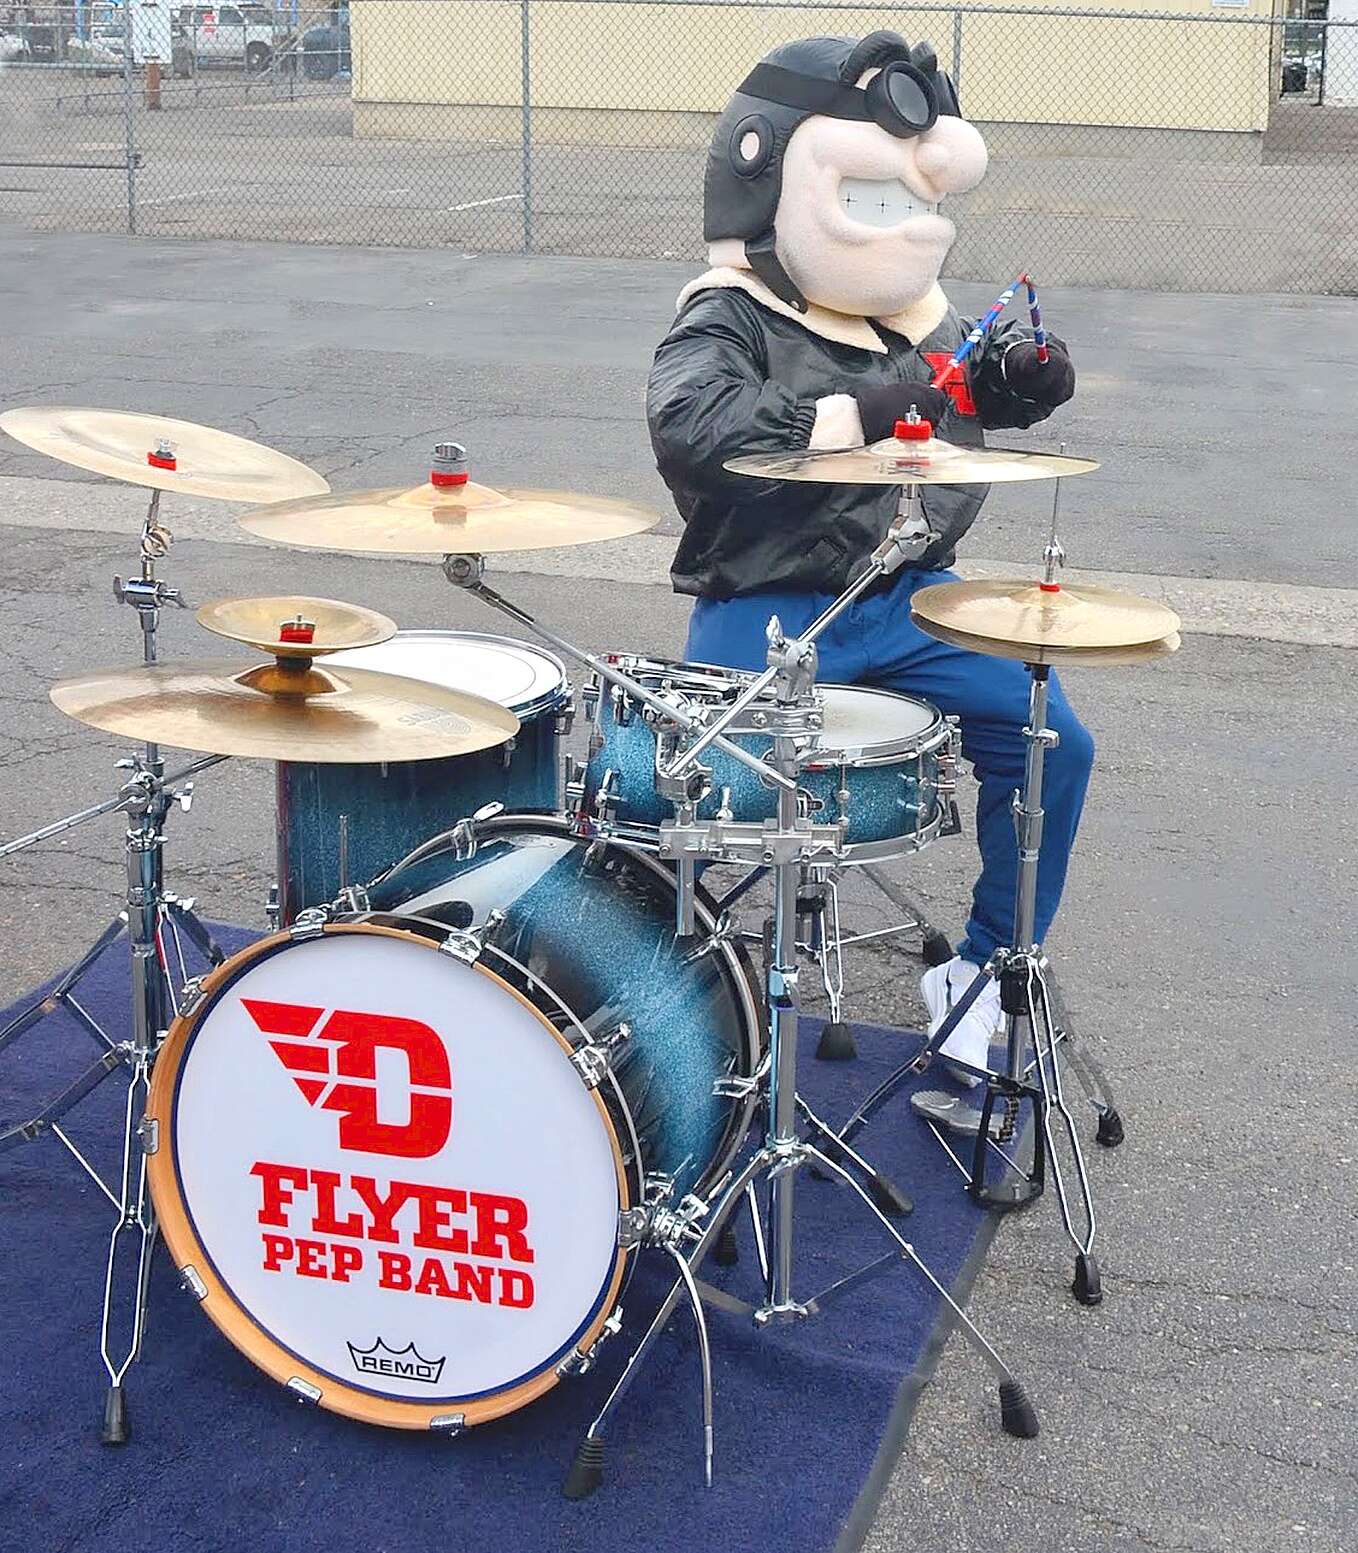 Rudy Flyer, the University of Dayton’s mascot, tries his hand at the drums. Submitted Photo